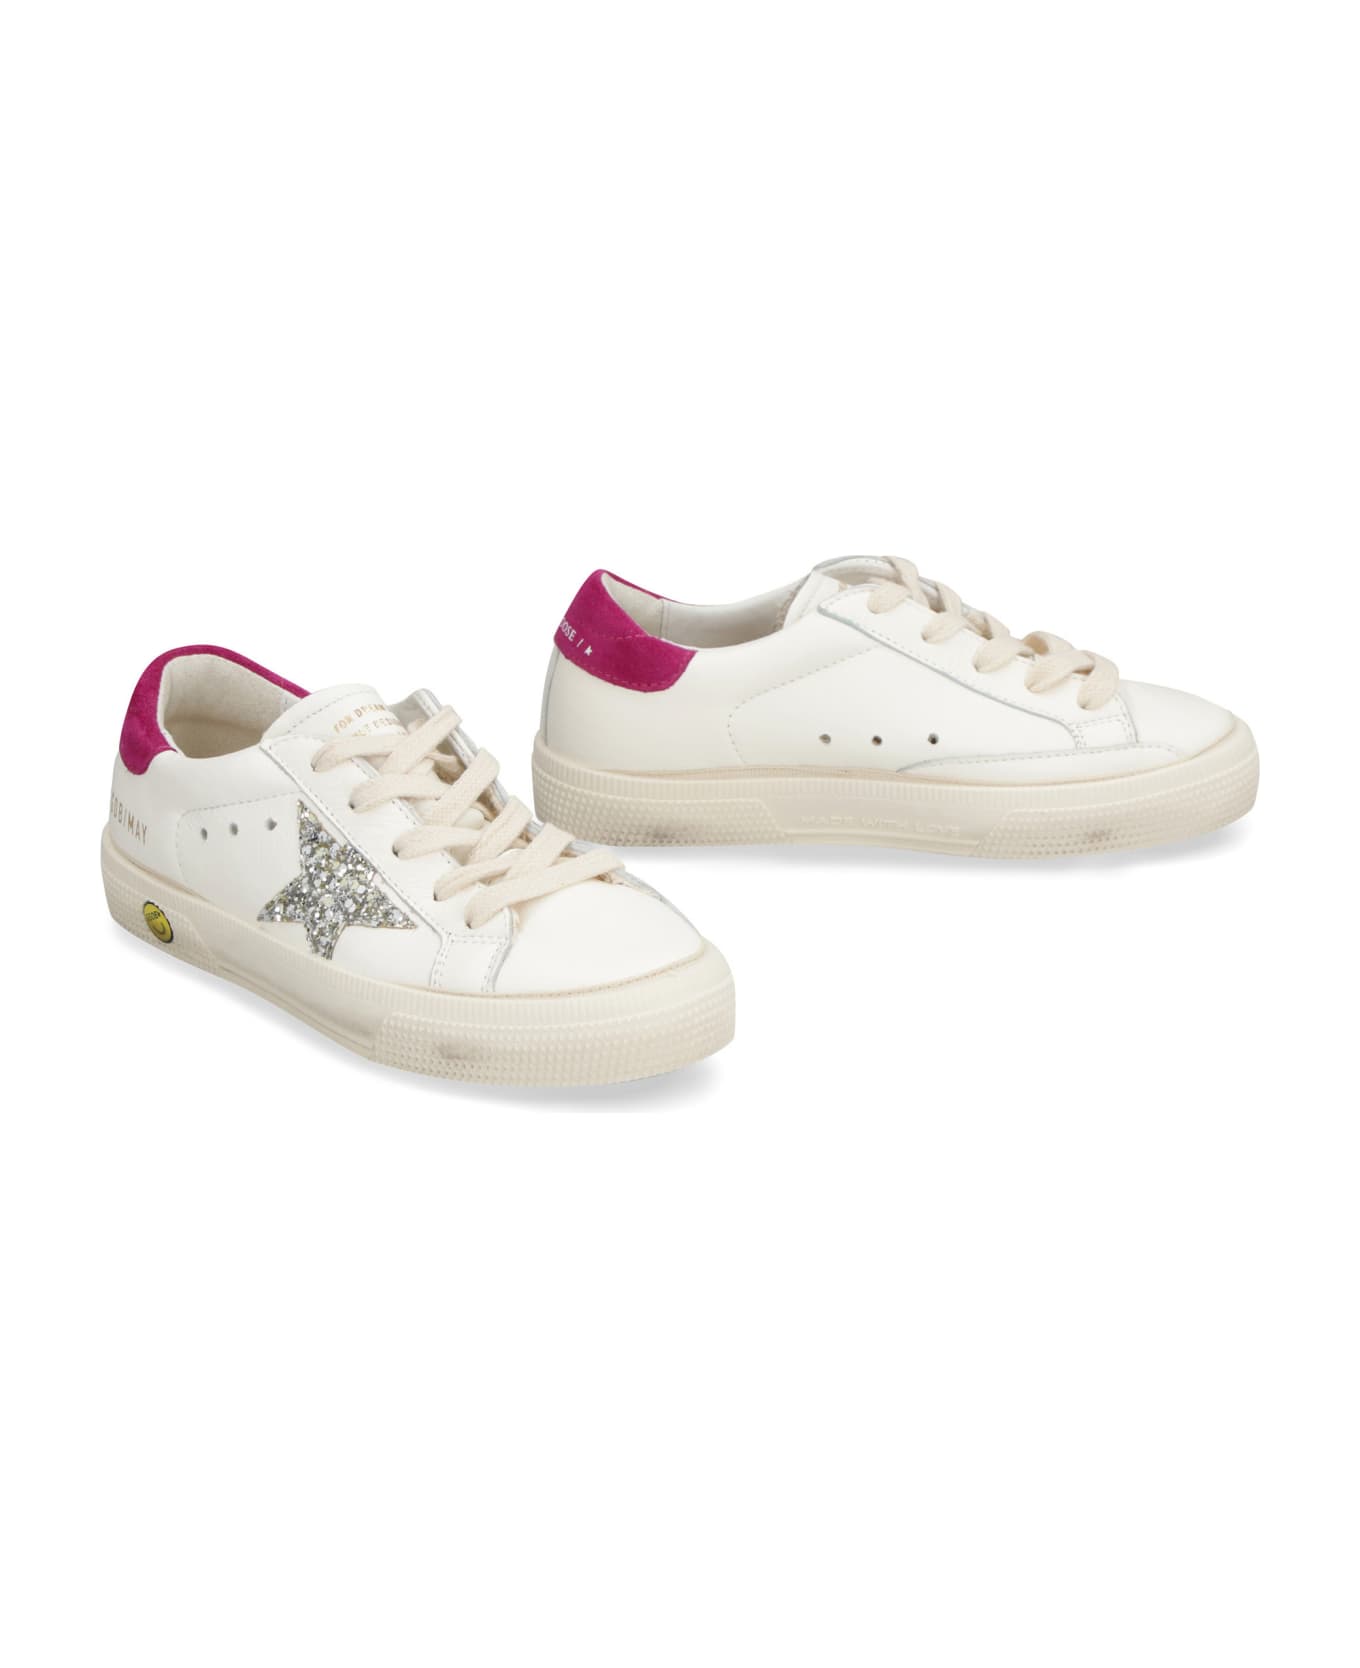 Golden Goose May Leather Sneakers - White シューズ